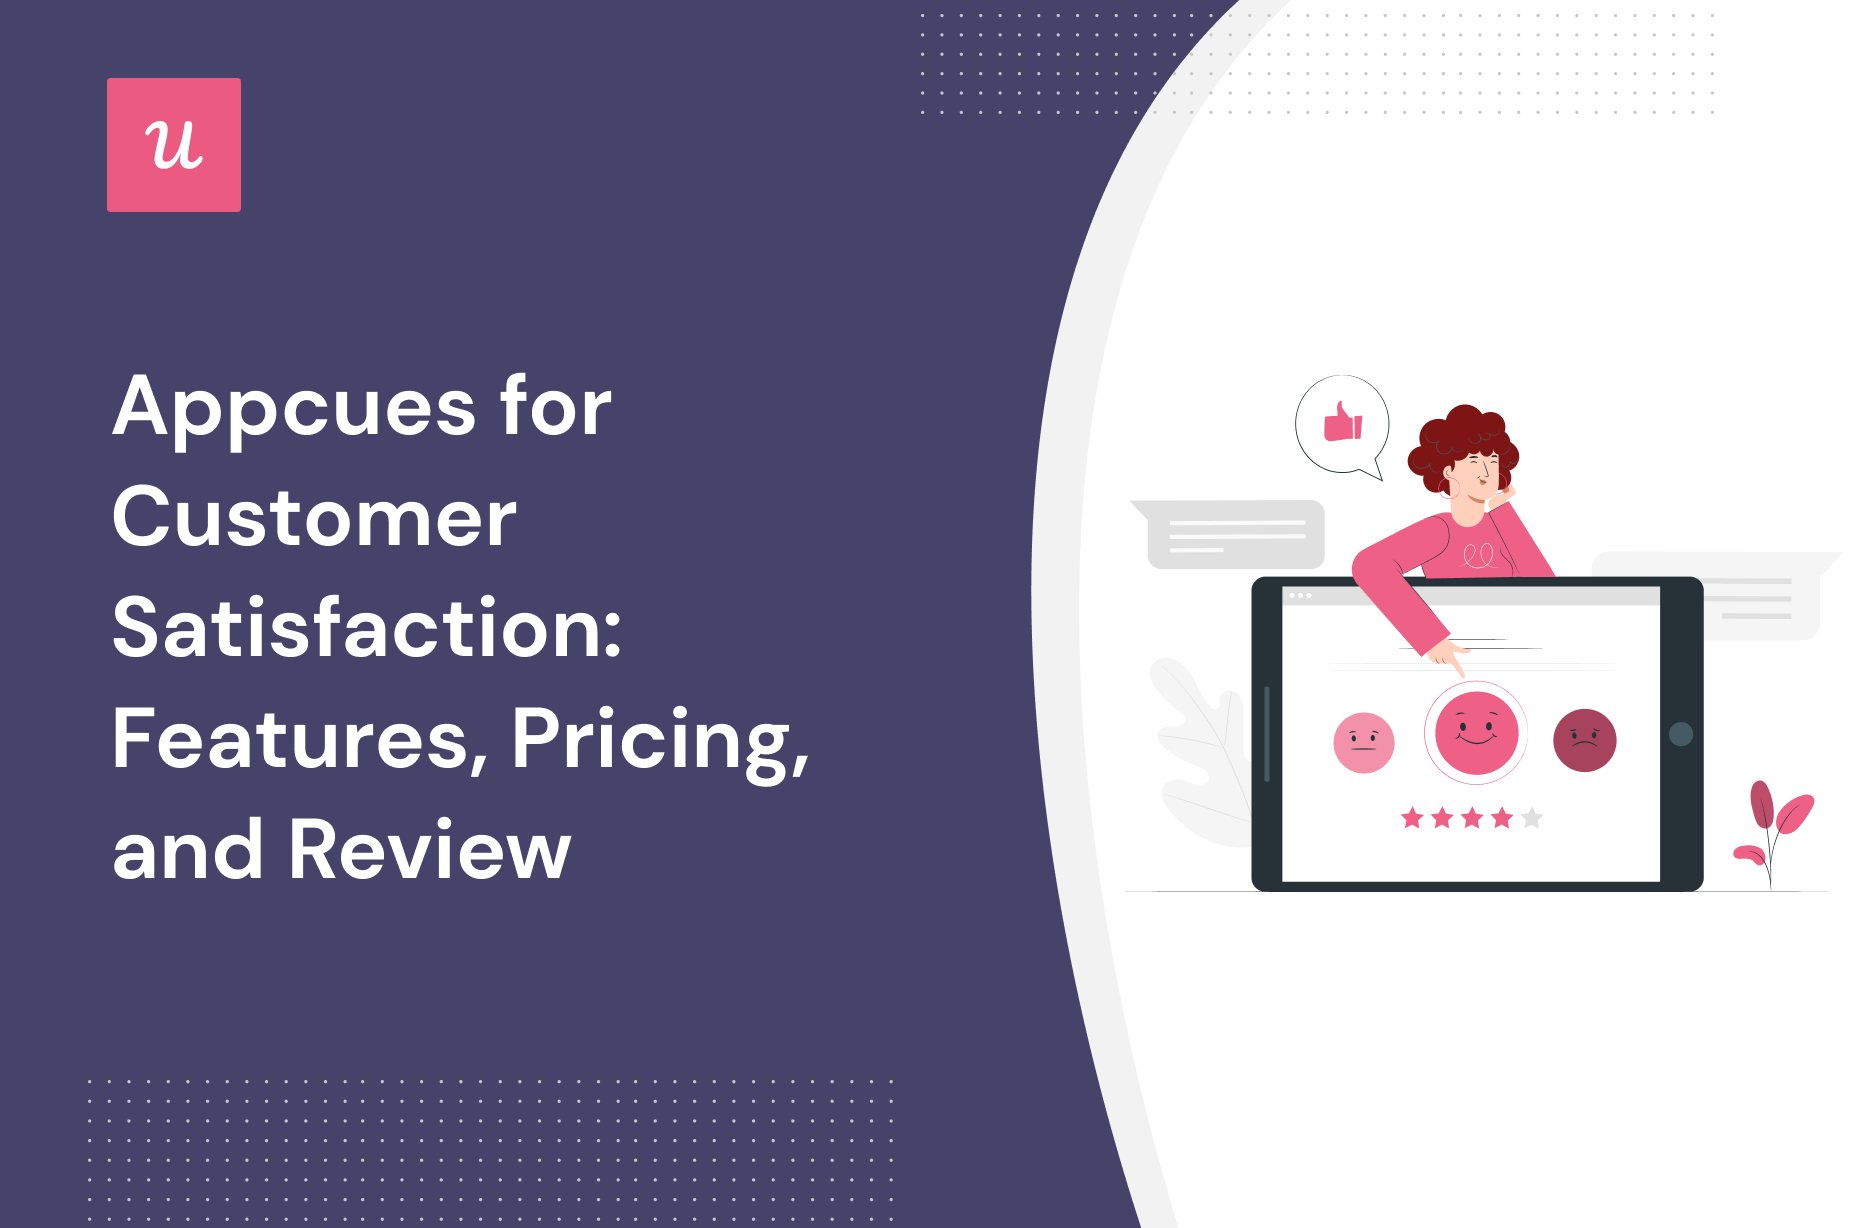 Appcues for Customer Satisfaction: Features, Pricing, and Review